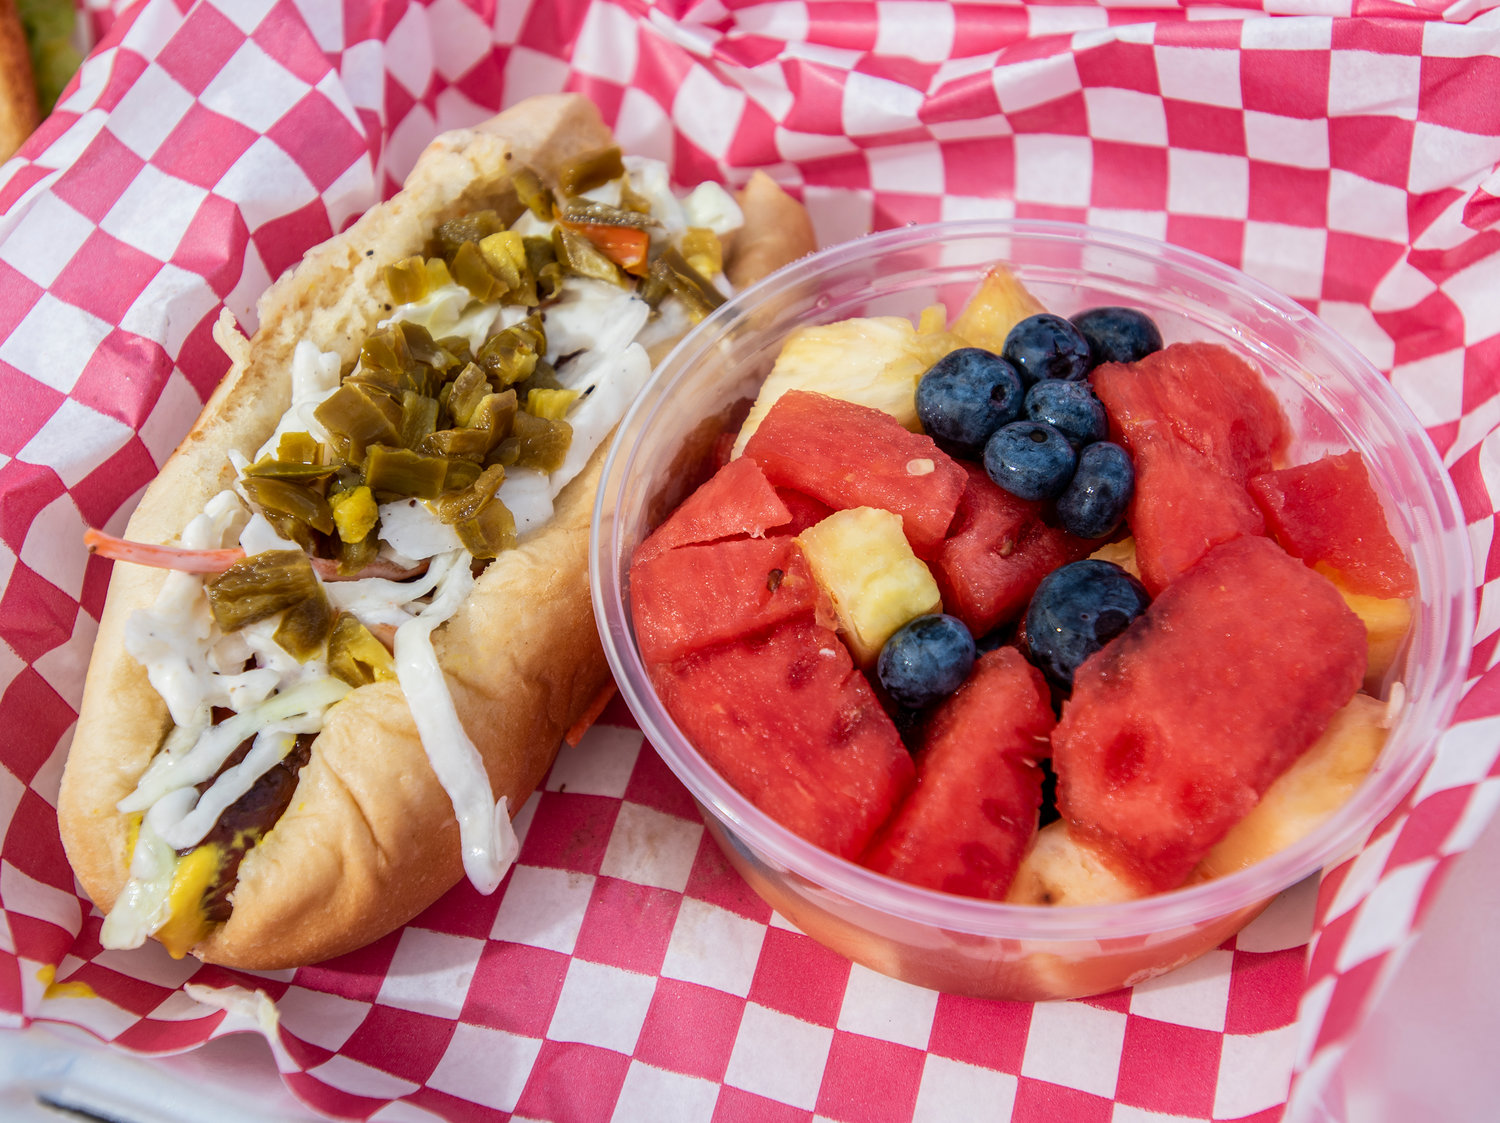 Grilled Hot Dogs with jalapeno pepper home made coleslaw and Fresh cut Fruit.